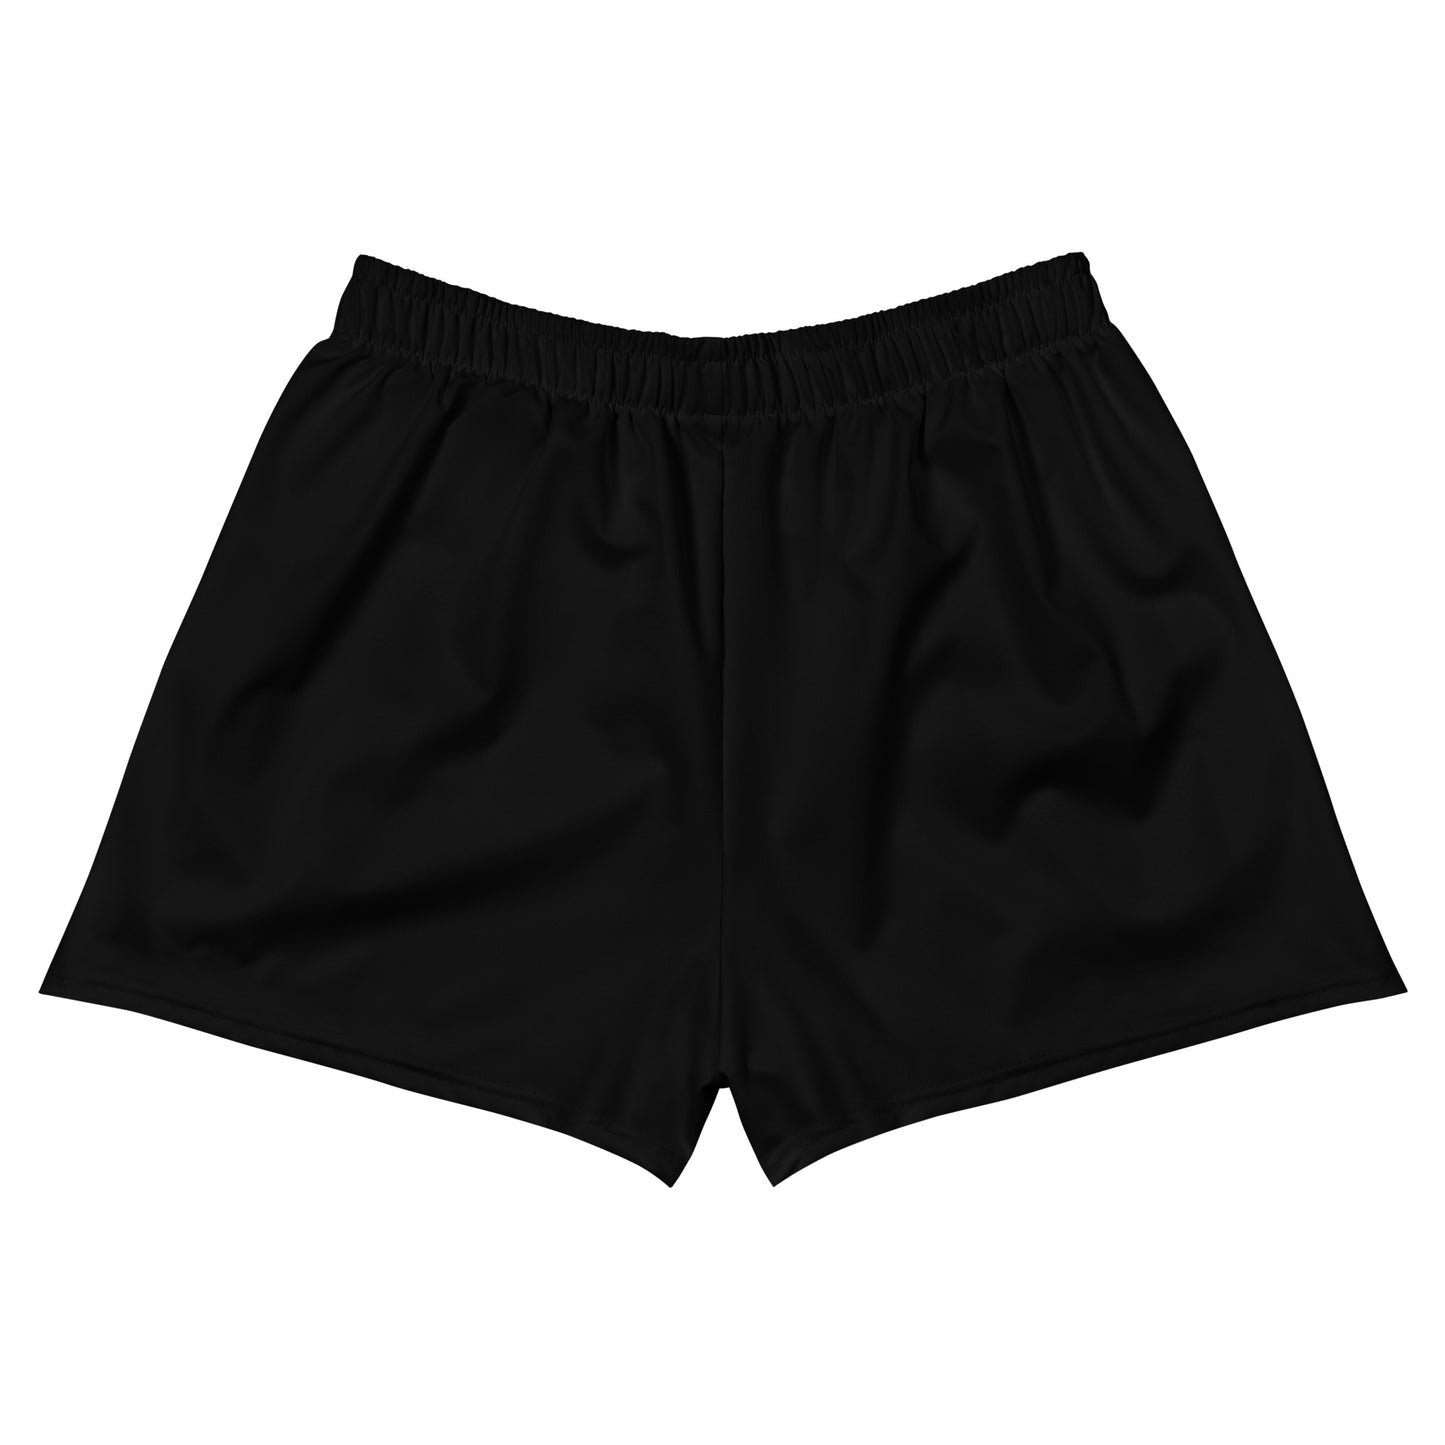 Classic Black Recycled Board Short with UPF 50+ Protection